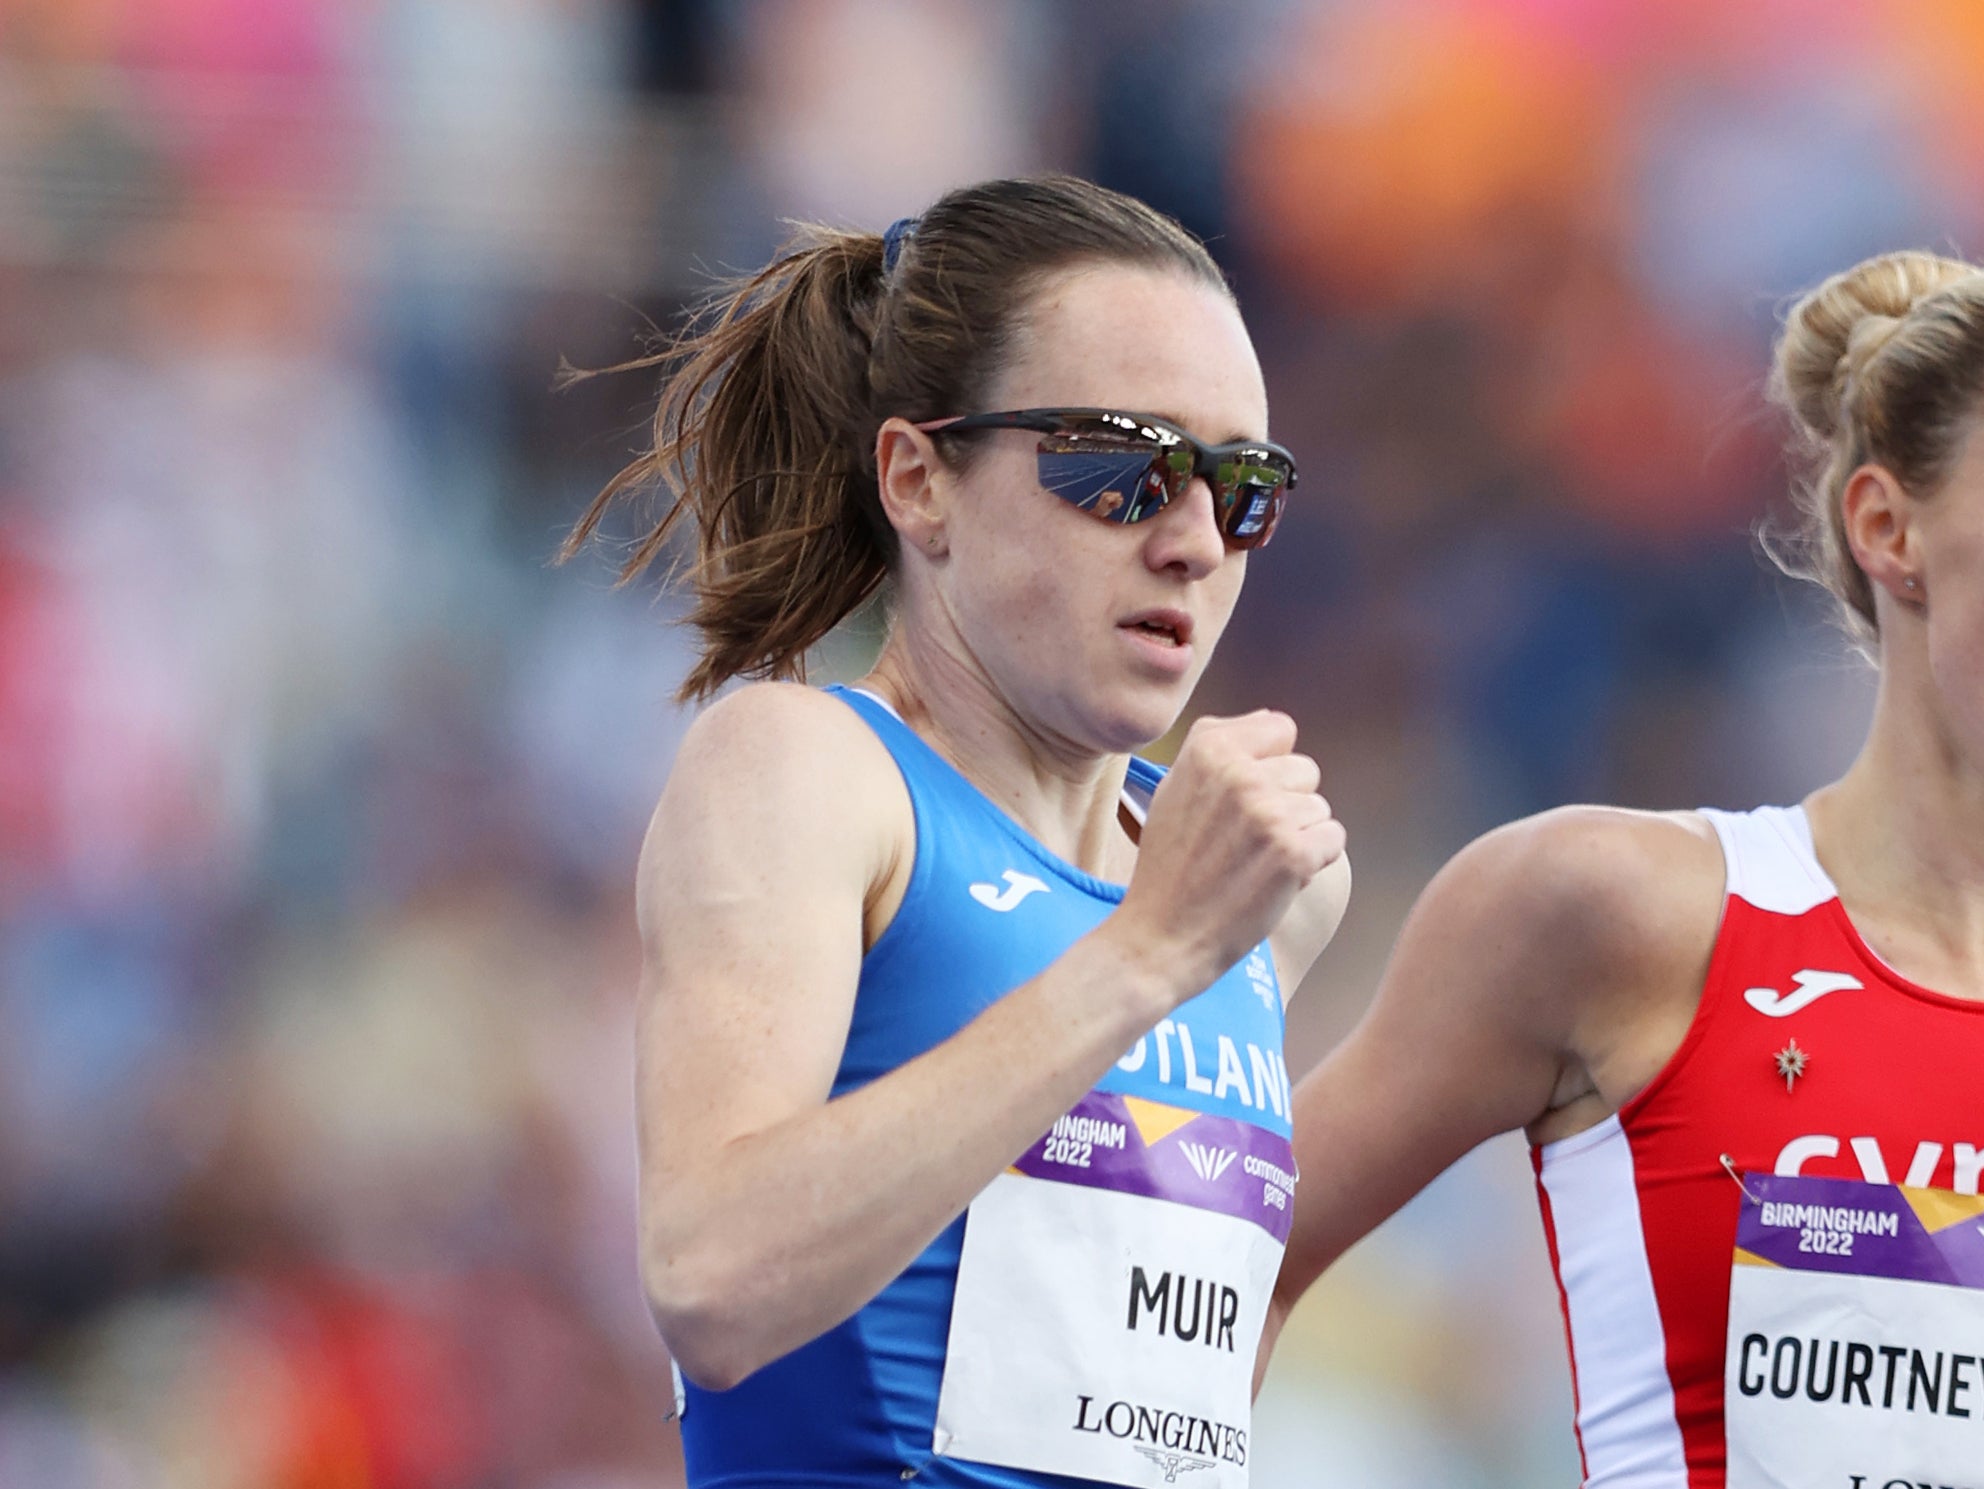 Laura Muir of Team Scotland competes during the Women's 1500m Round 1 heats